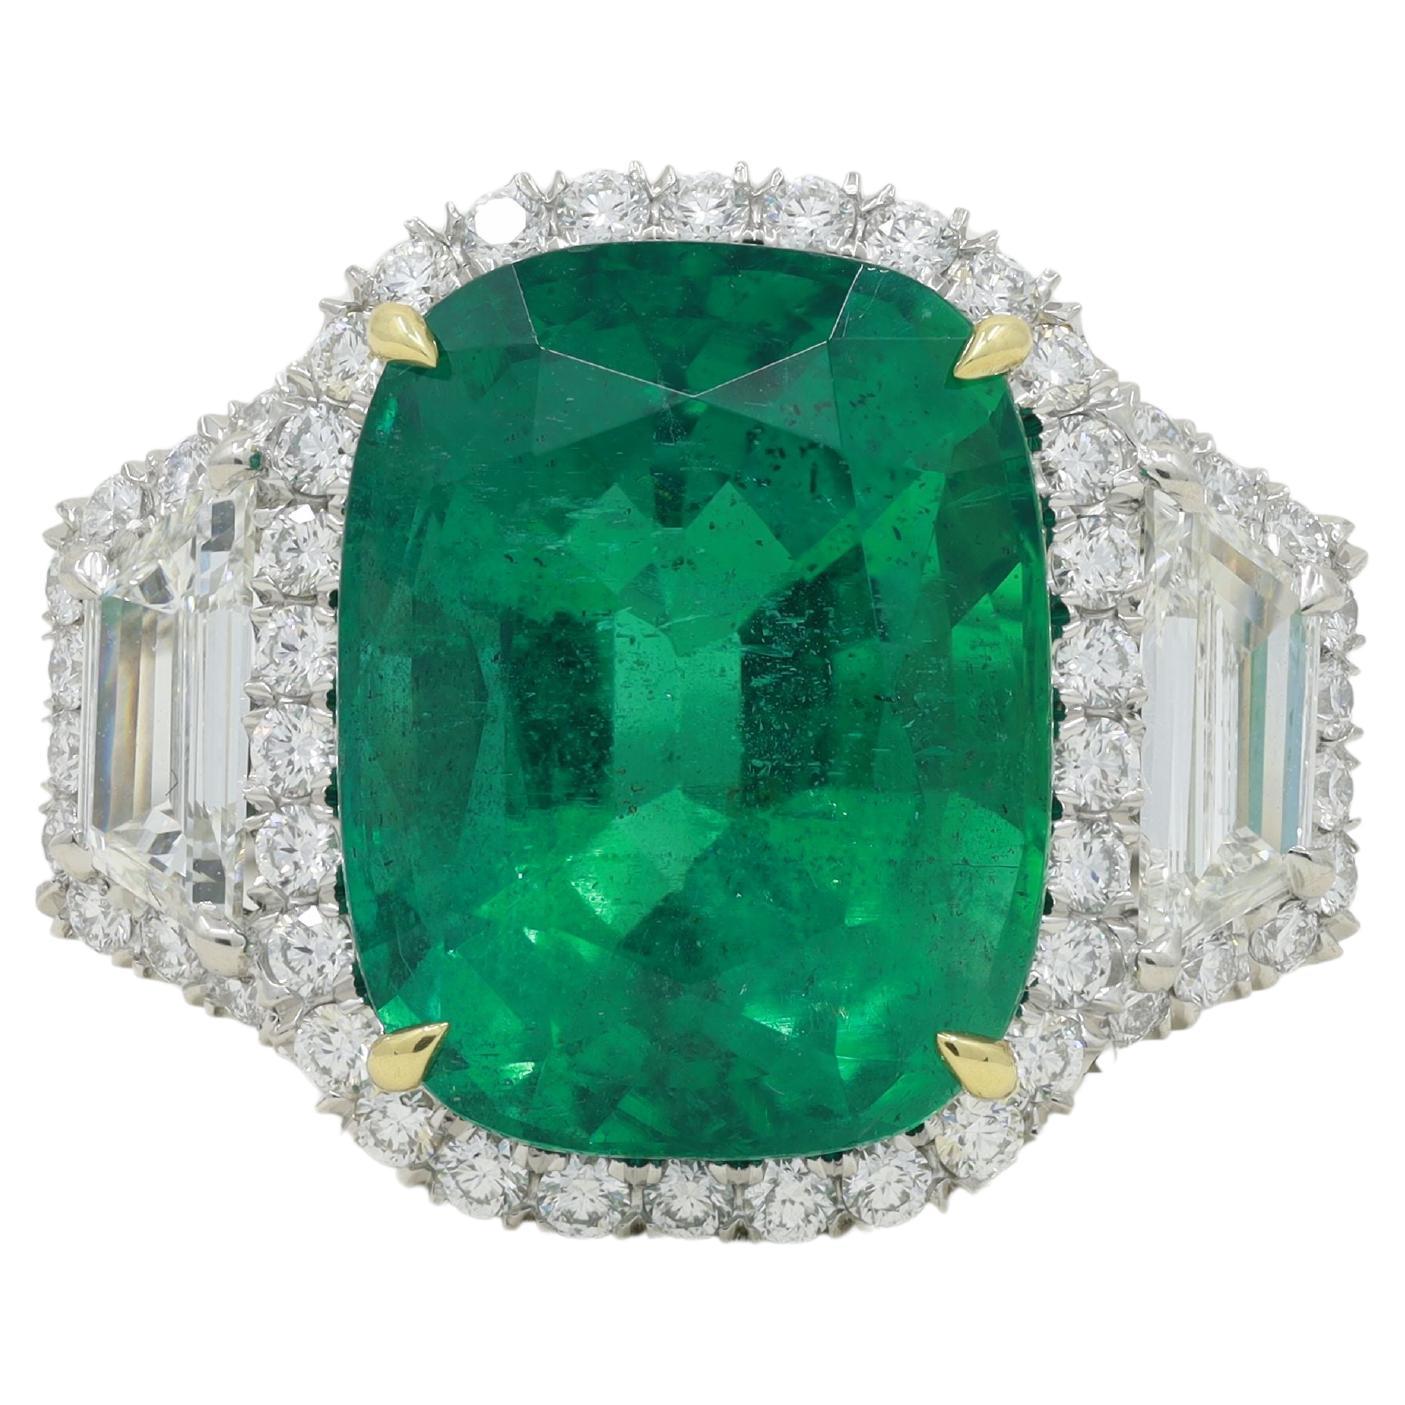 Platinum and 18 kt yellow gold emerald and diamond ring featuring a 11.22 ct cushion cut green emerald surrounded by diamonds and step trapezoids weighing 2.85 cts tw in a halo setting.
Diana M. is a leading supplier of top-quality fine jewelry for